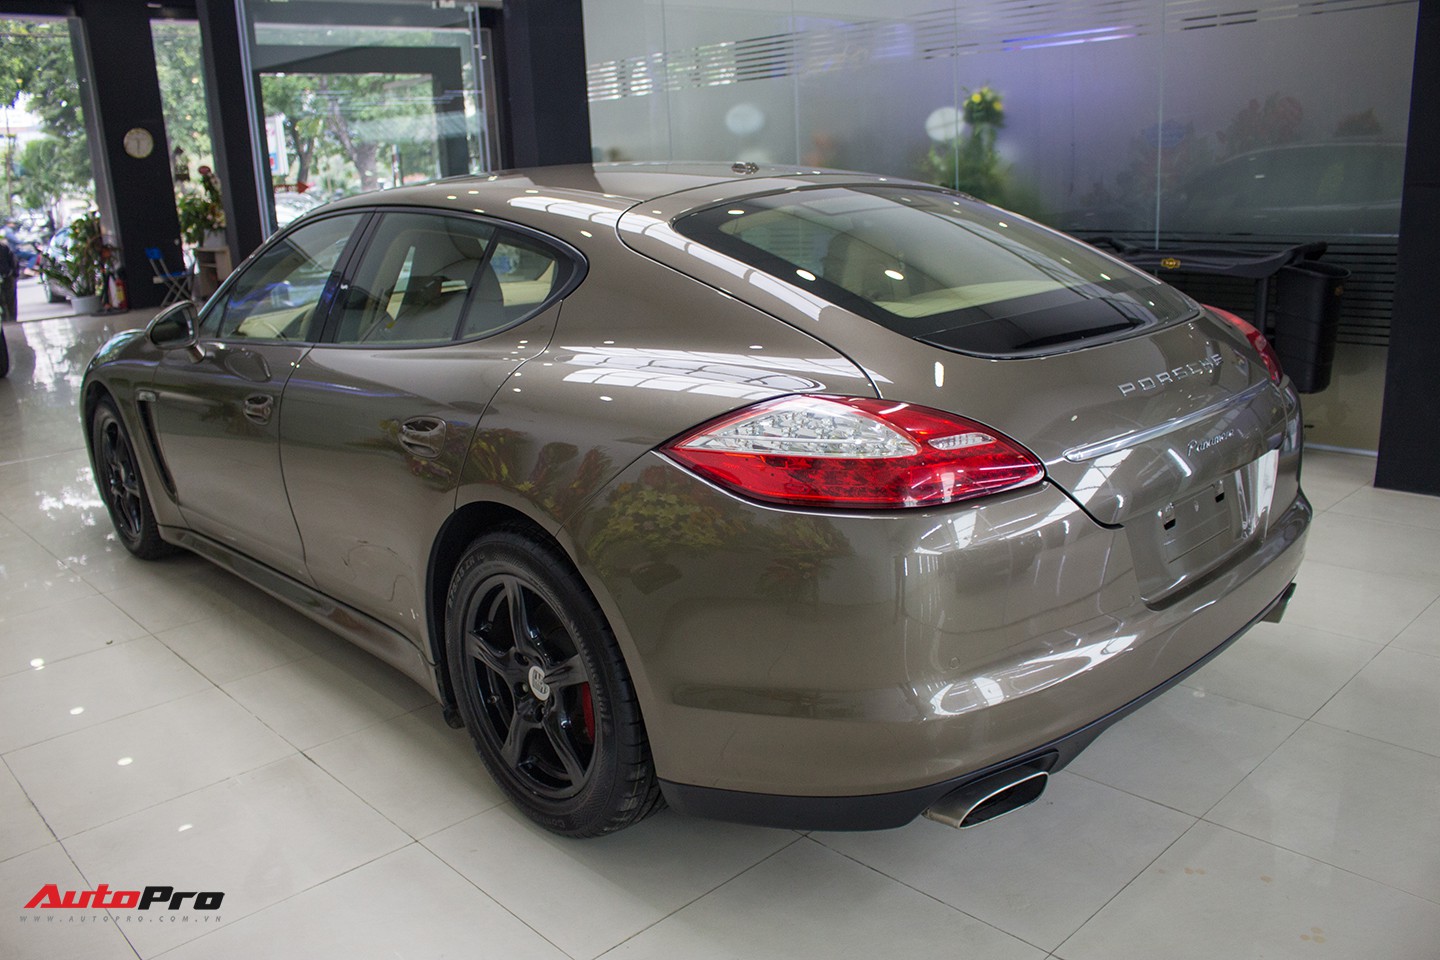 2012 Porsche Panamera S Hybrid review notes The best hybrid system weve  come across